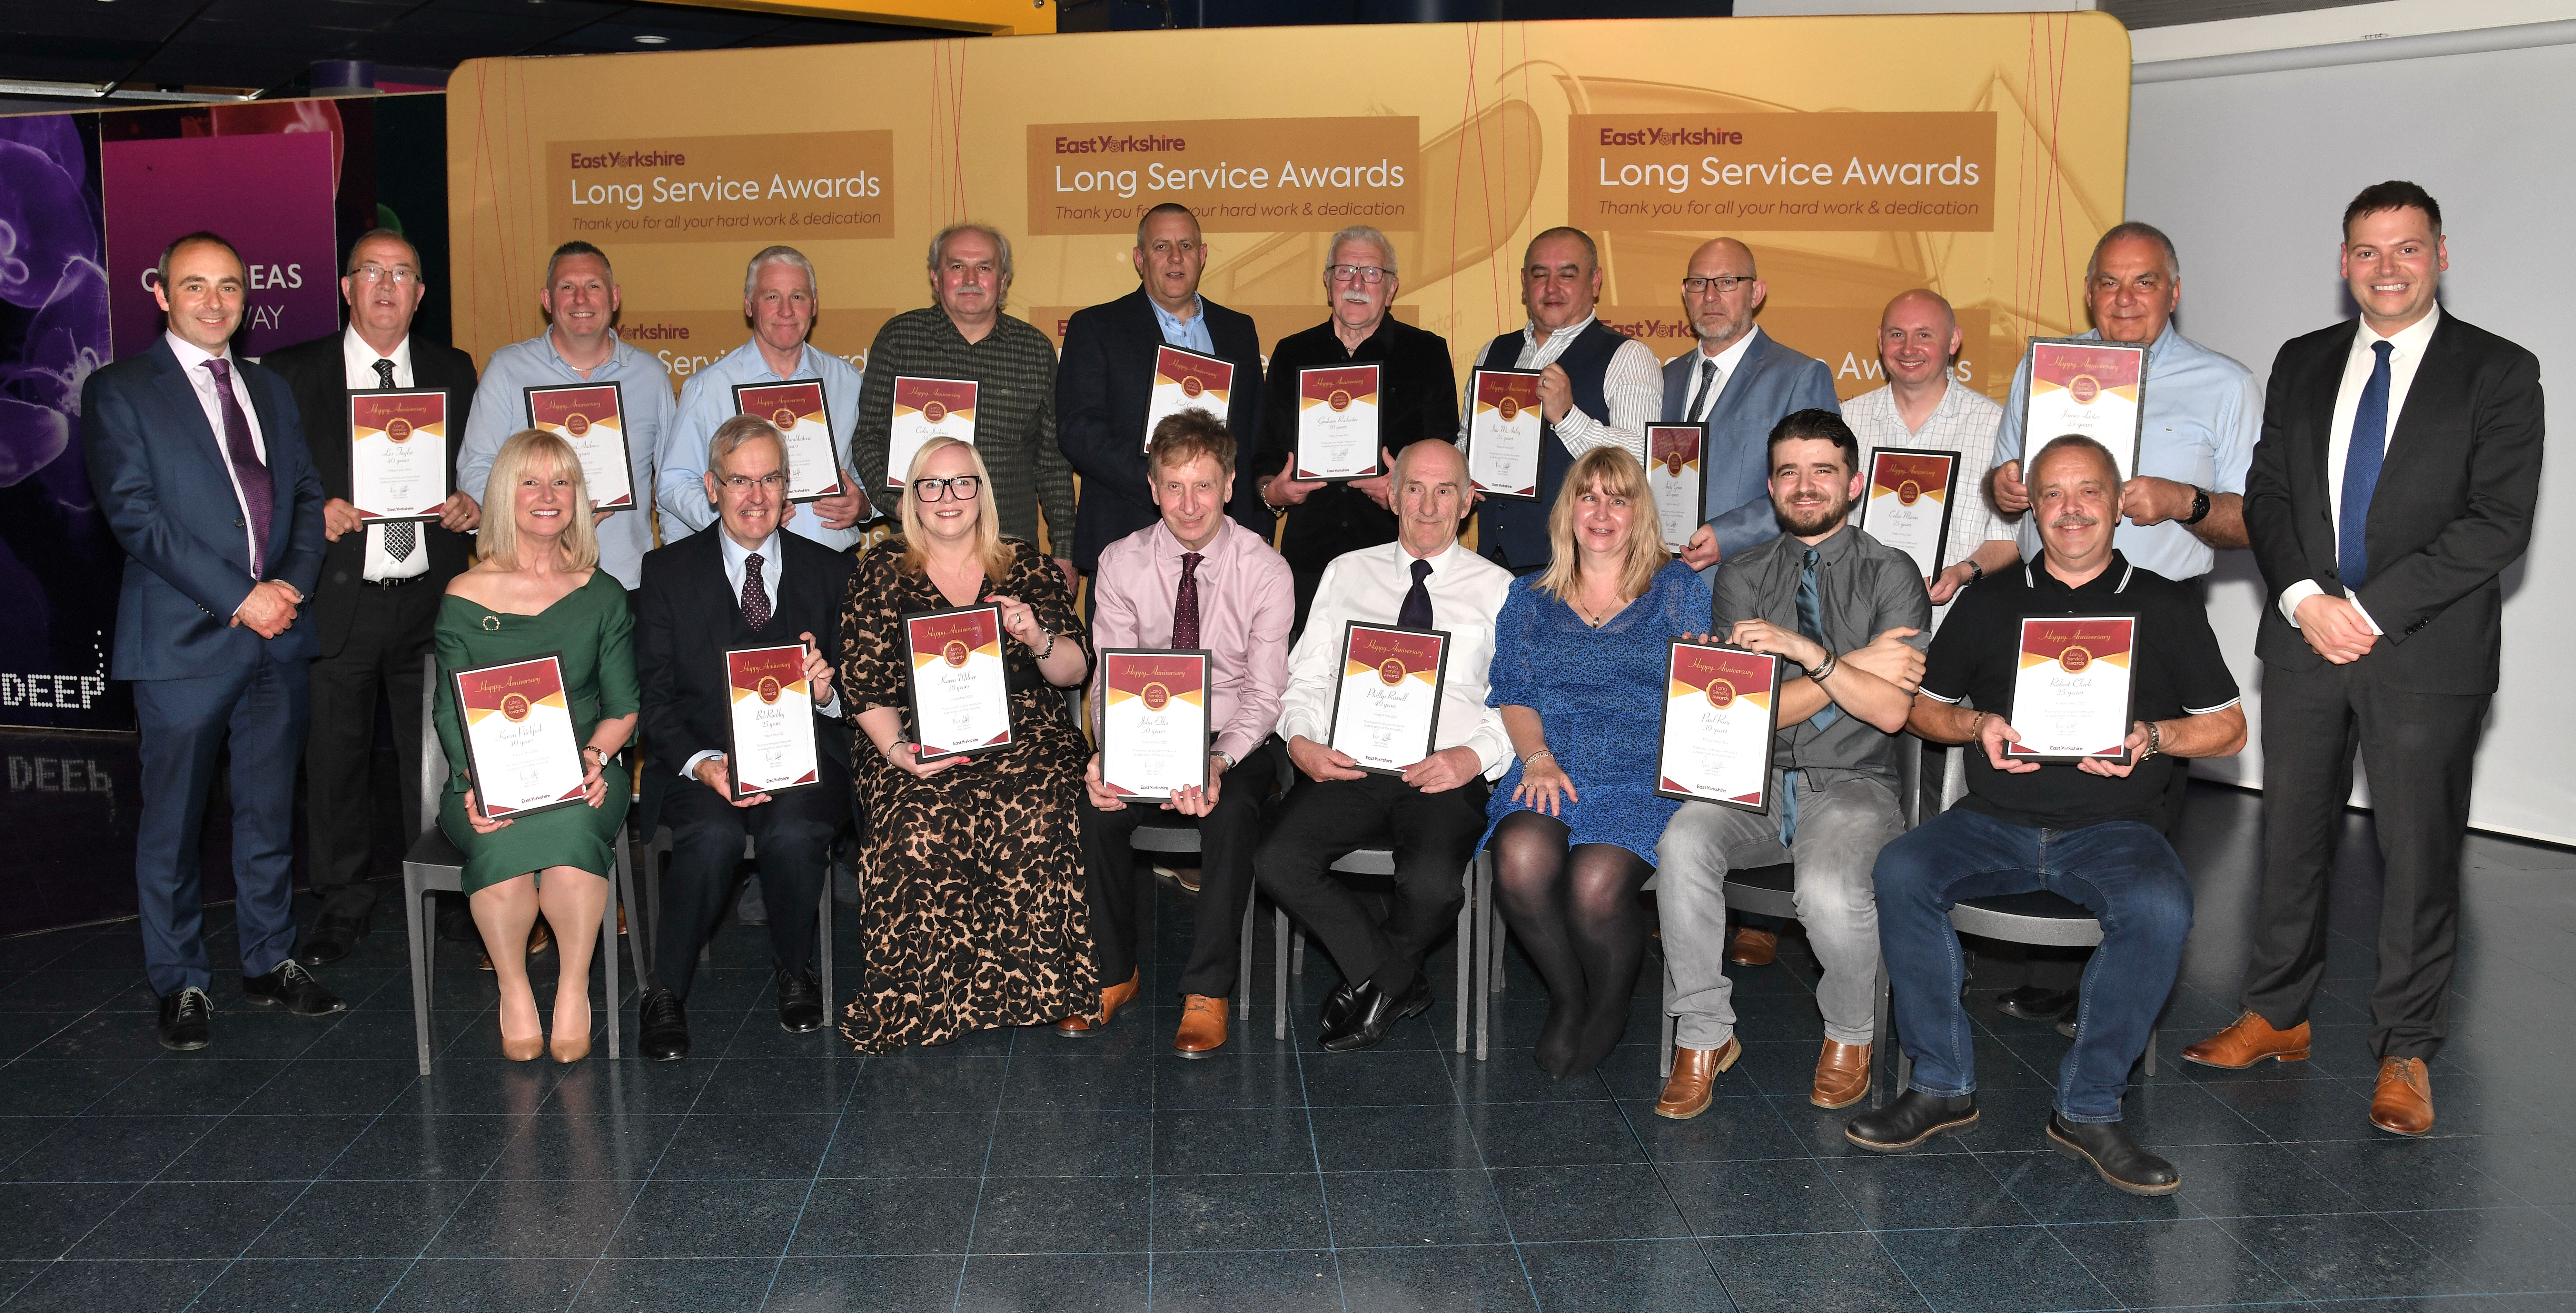 A group of East Yorkshire Long Service Awardees